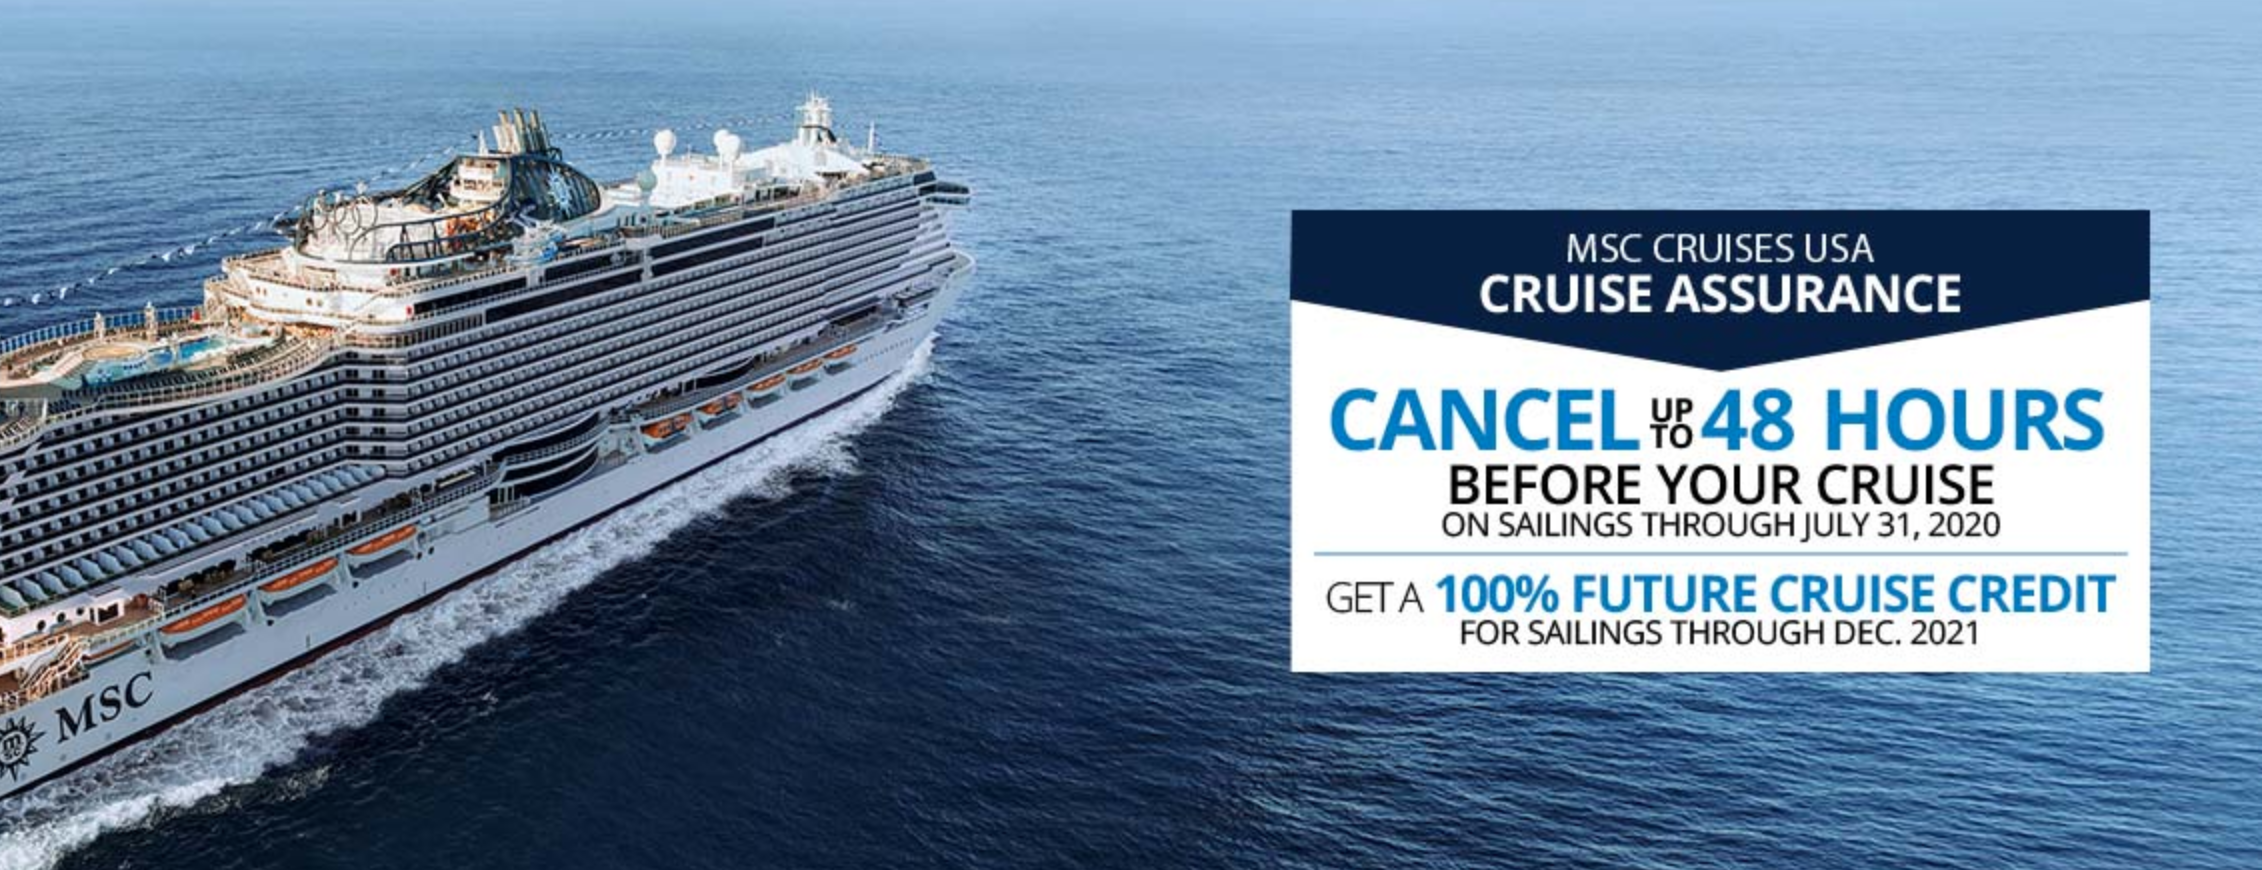 msc cruises cancellation email